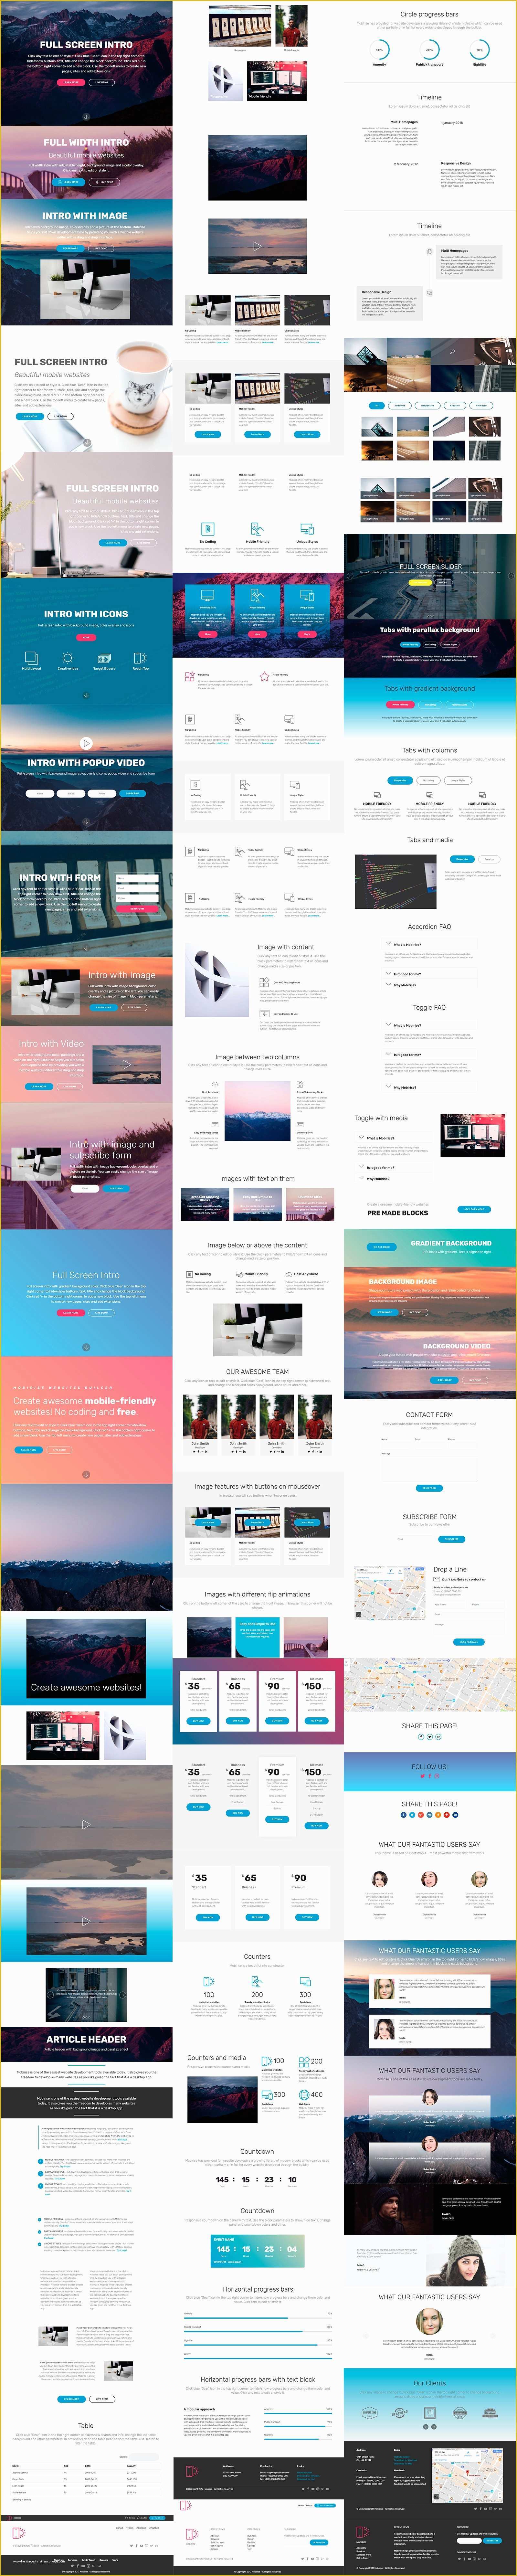 Free Landing Page Templates Bootstrap Of Template Collection Bootstrap Landing Page Template